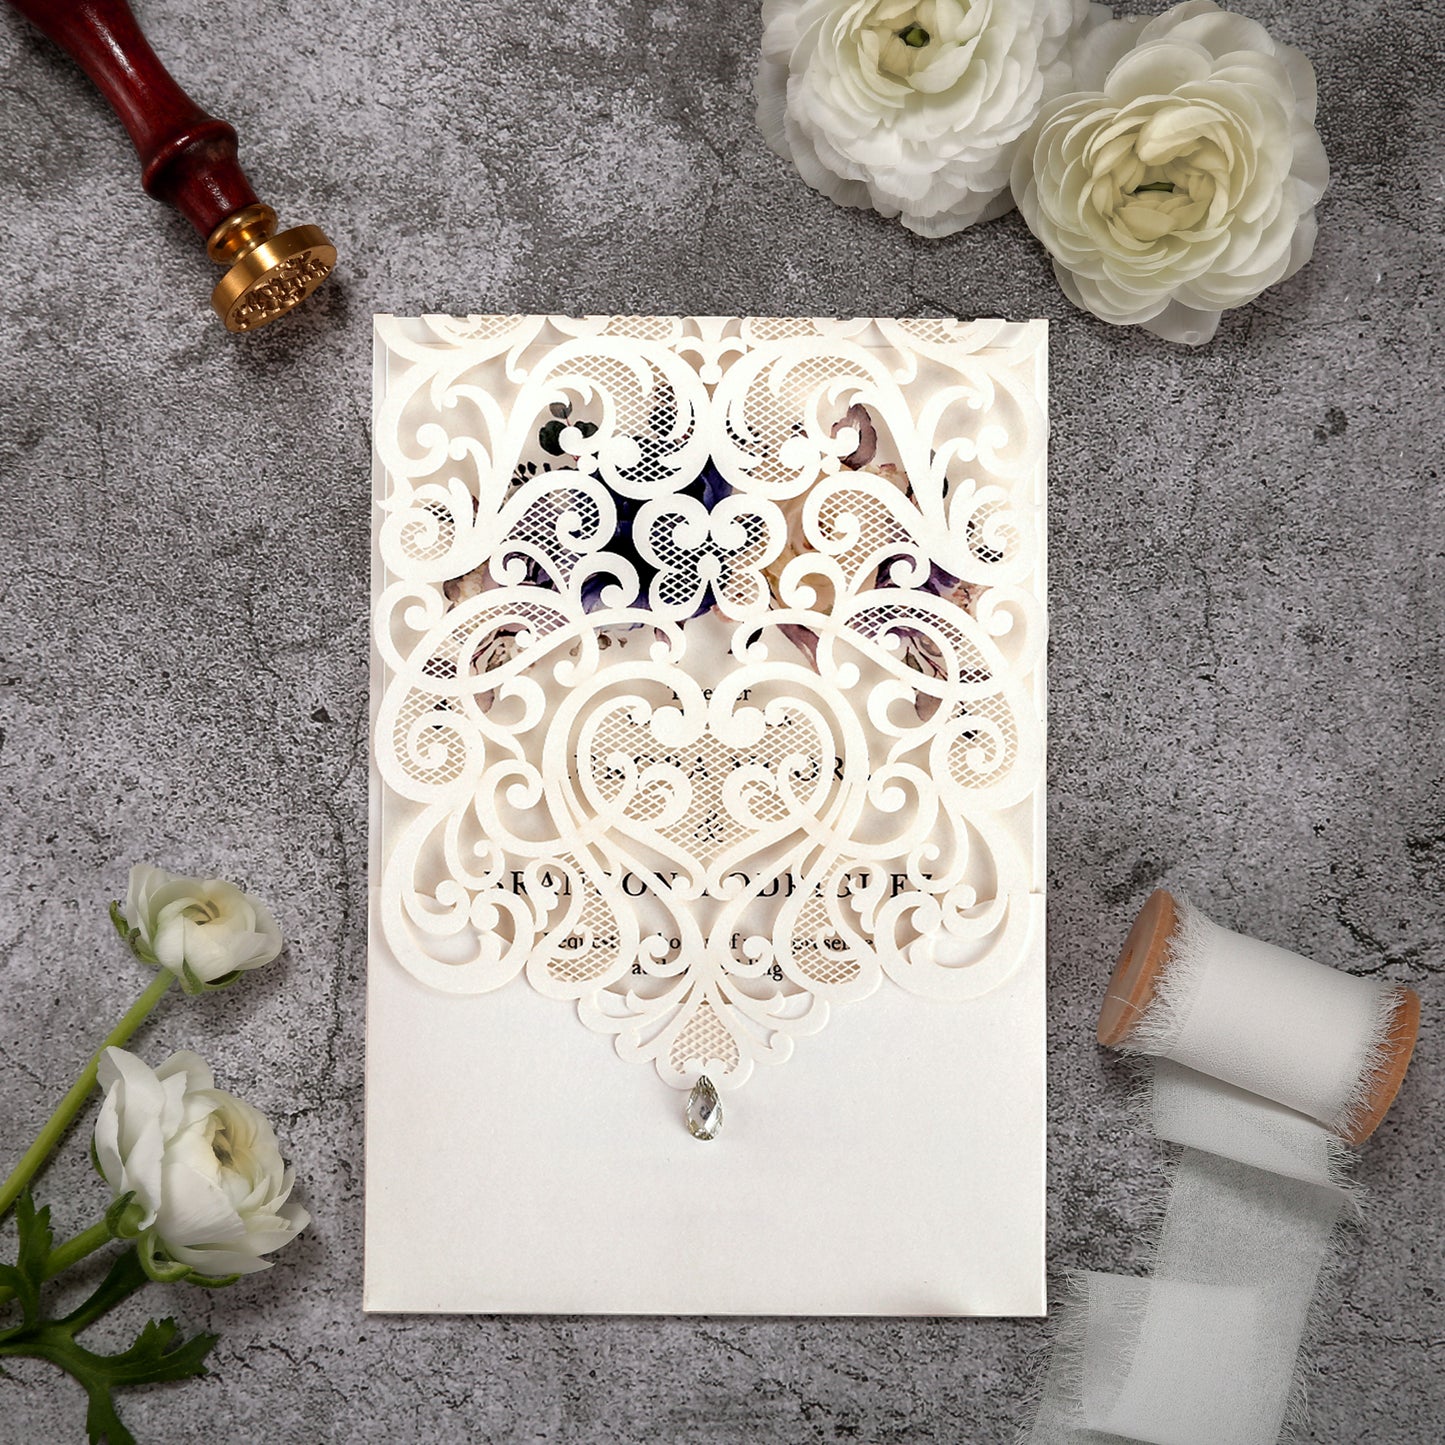 Vertical Blue Floral Laser cut invitations for Wedding Anniversary